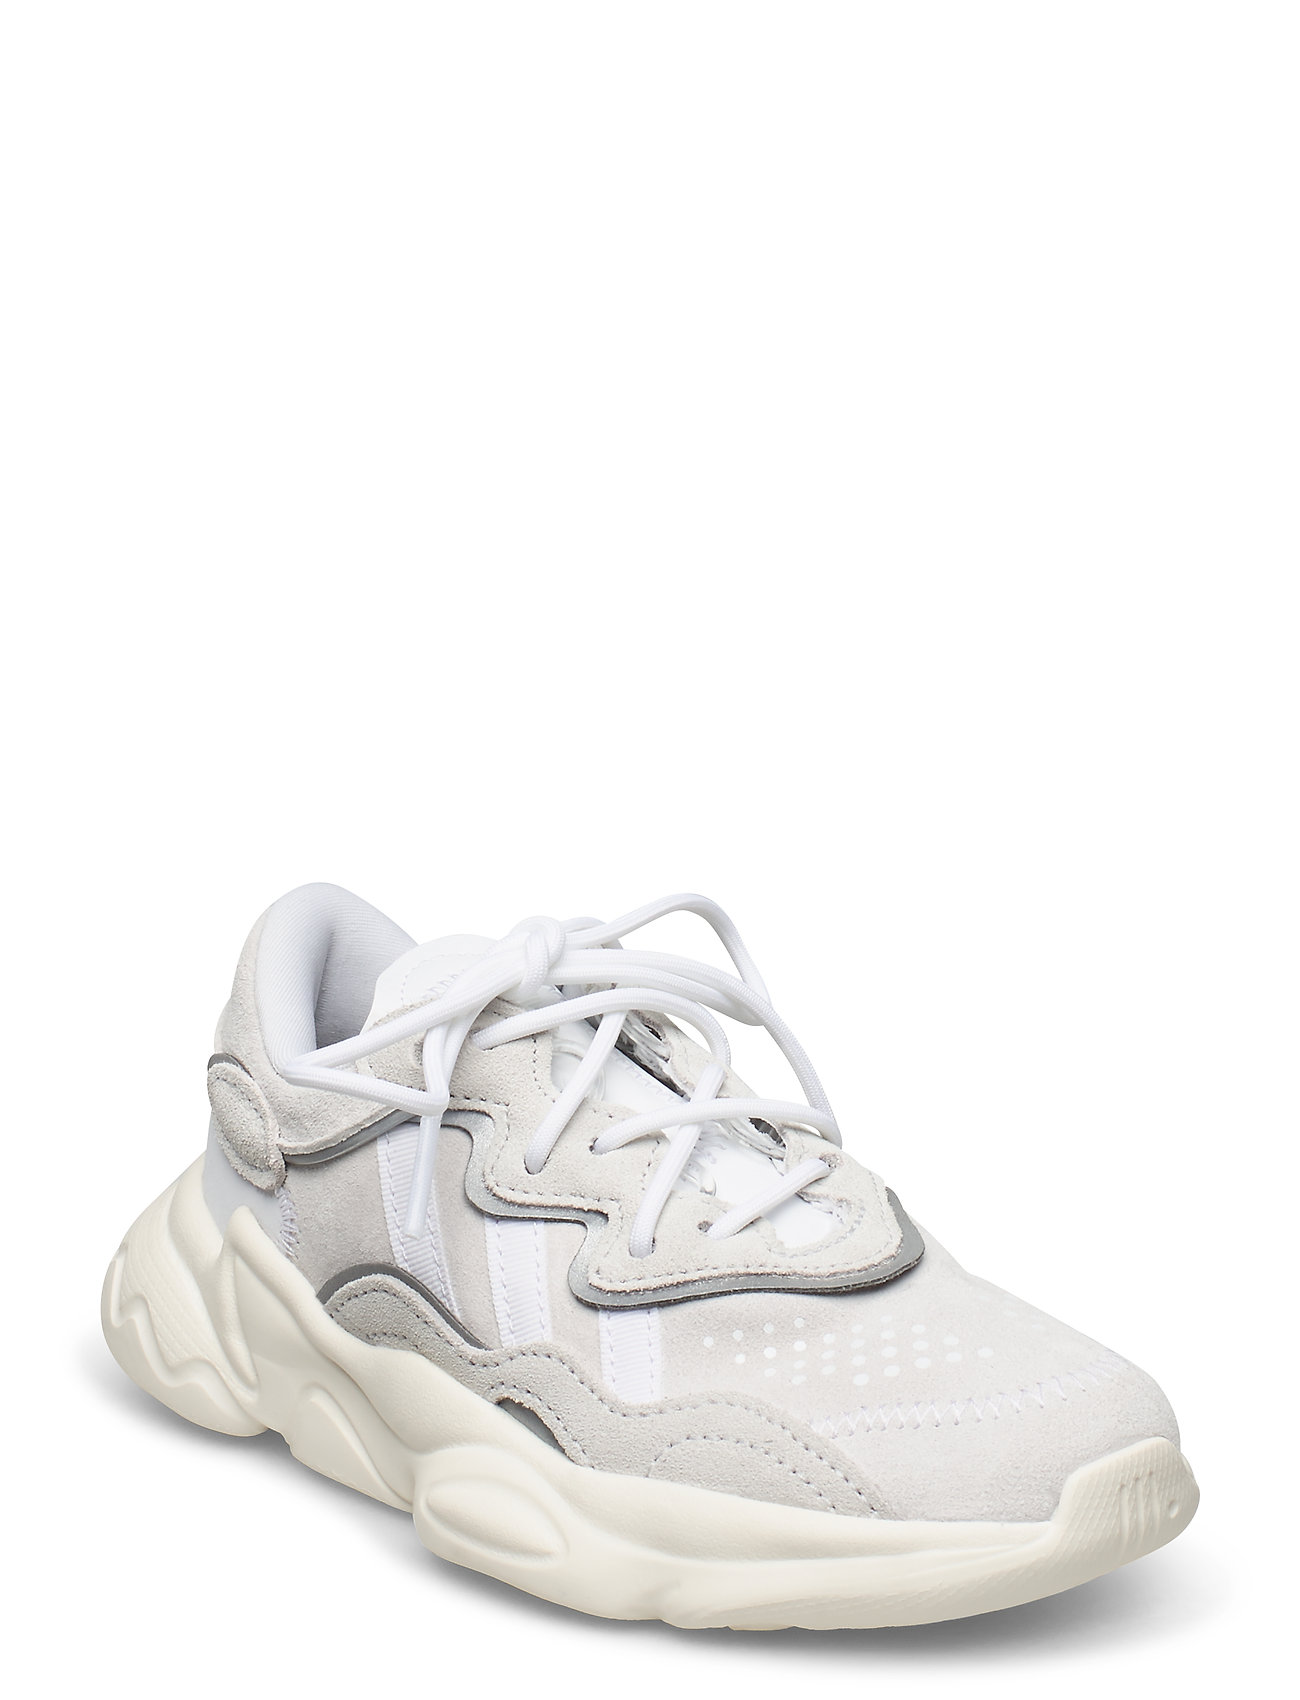 Ozweego C Low-top Sneakers White Adidas Originals